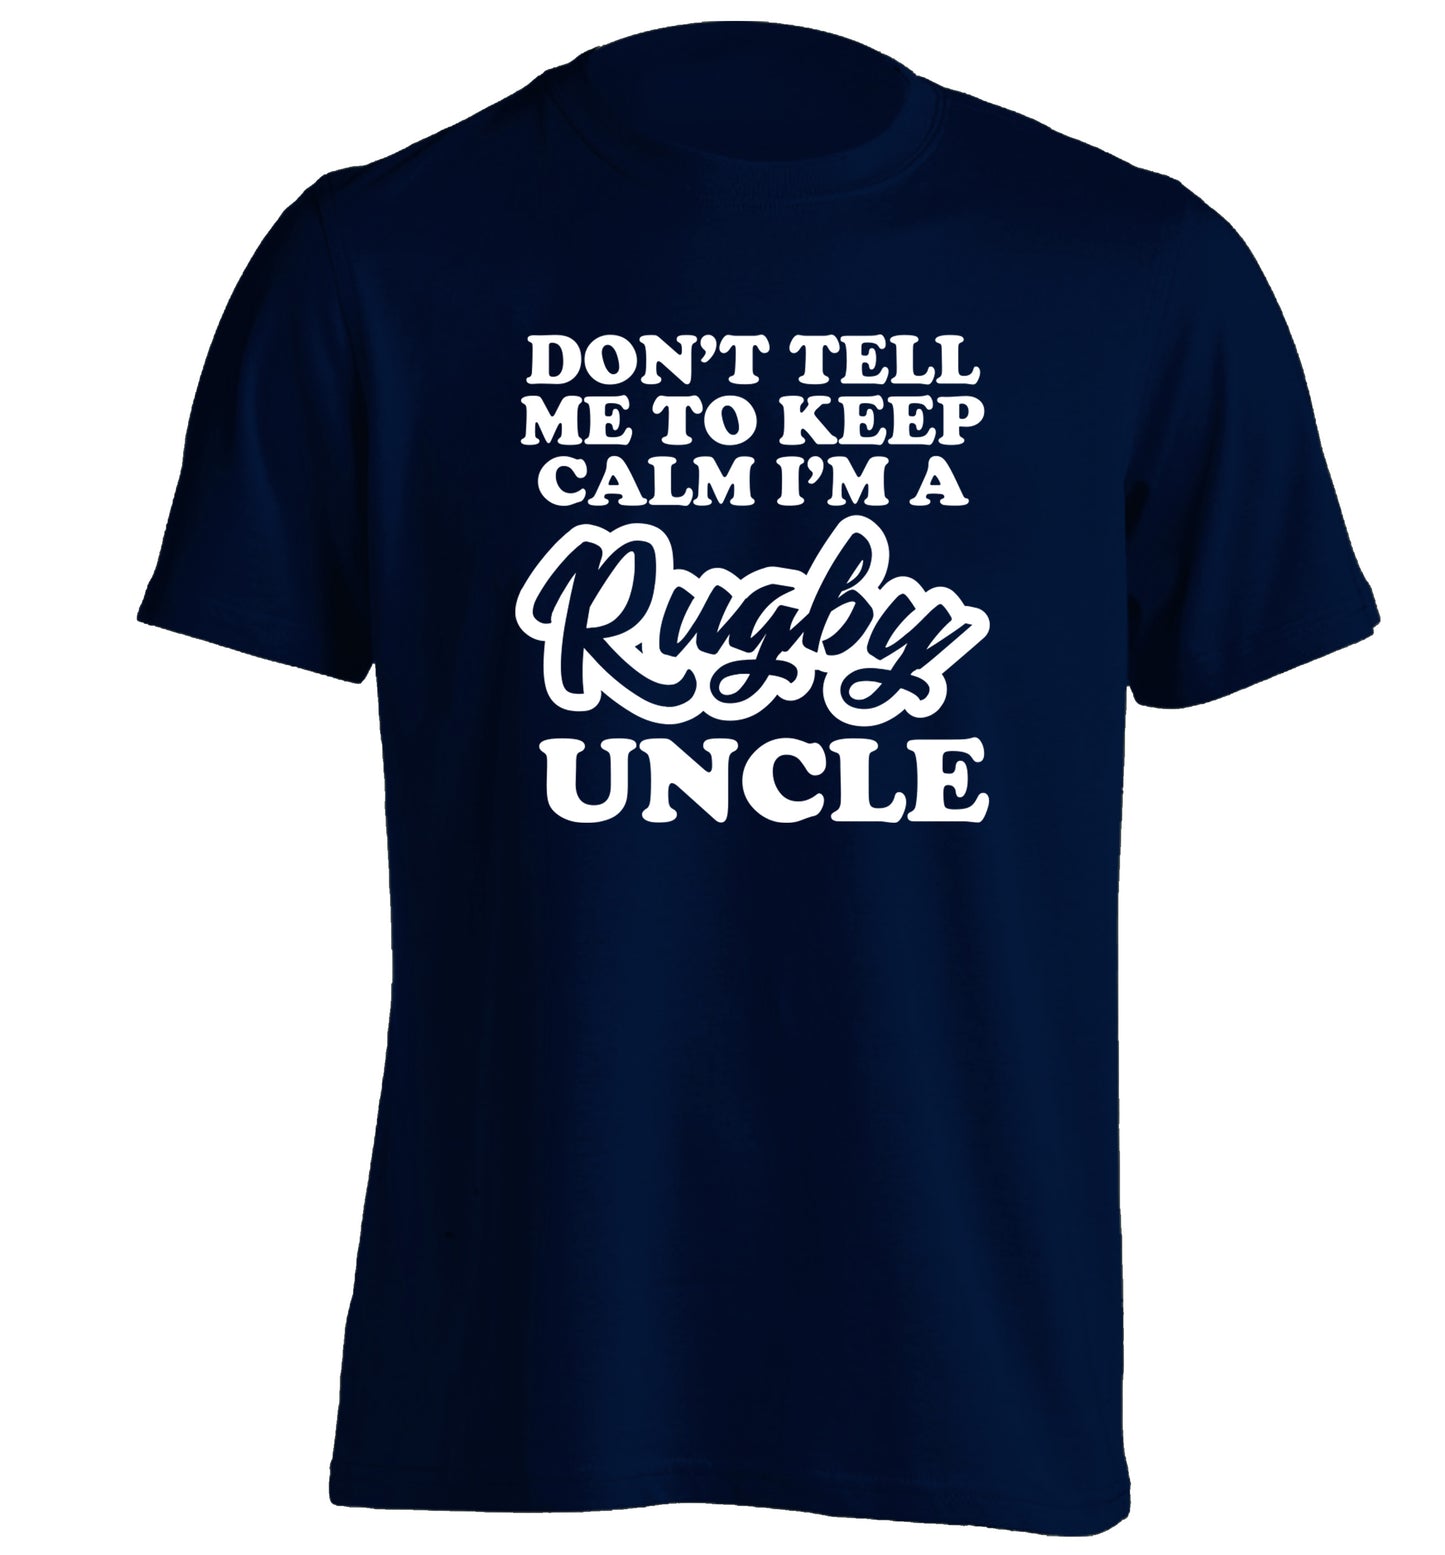 Don't tell me to keep calm I'm a rugby uncle adults unisex navy Tshirt 2XL